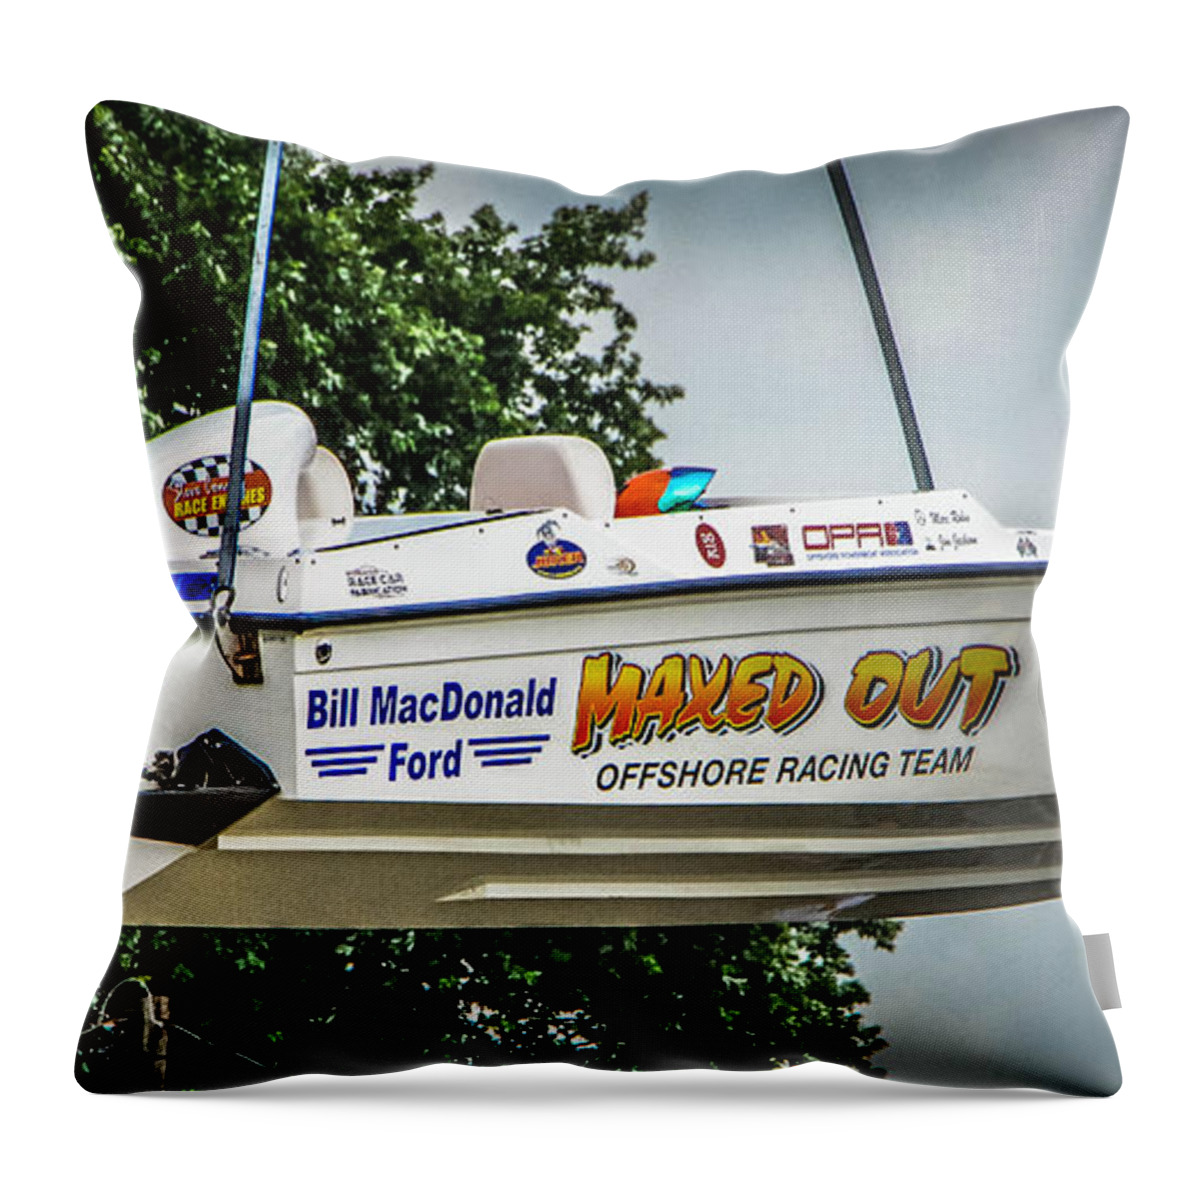 Maxed Out Throw Pillow featuring the photograph Maxed Out by Grace Grogan